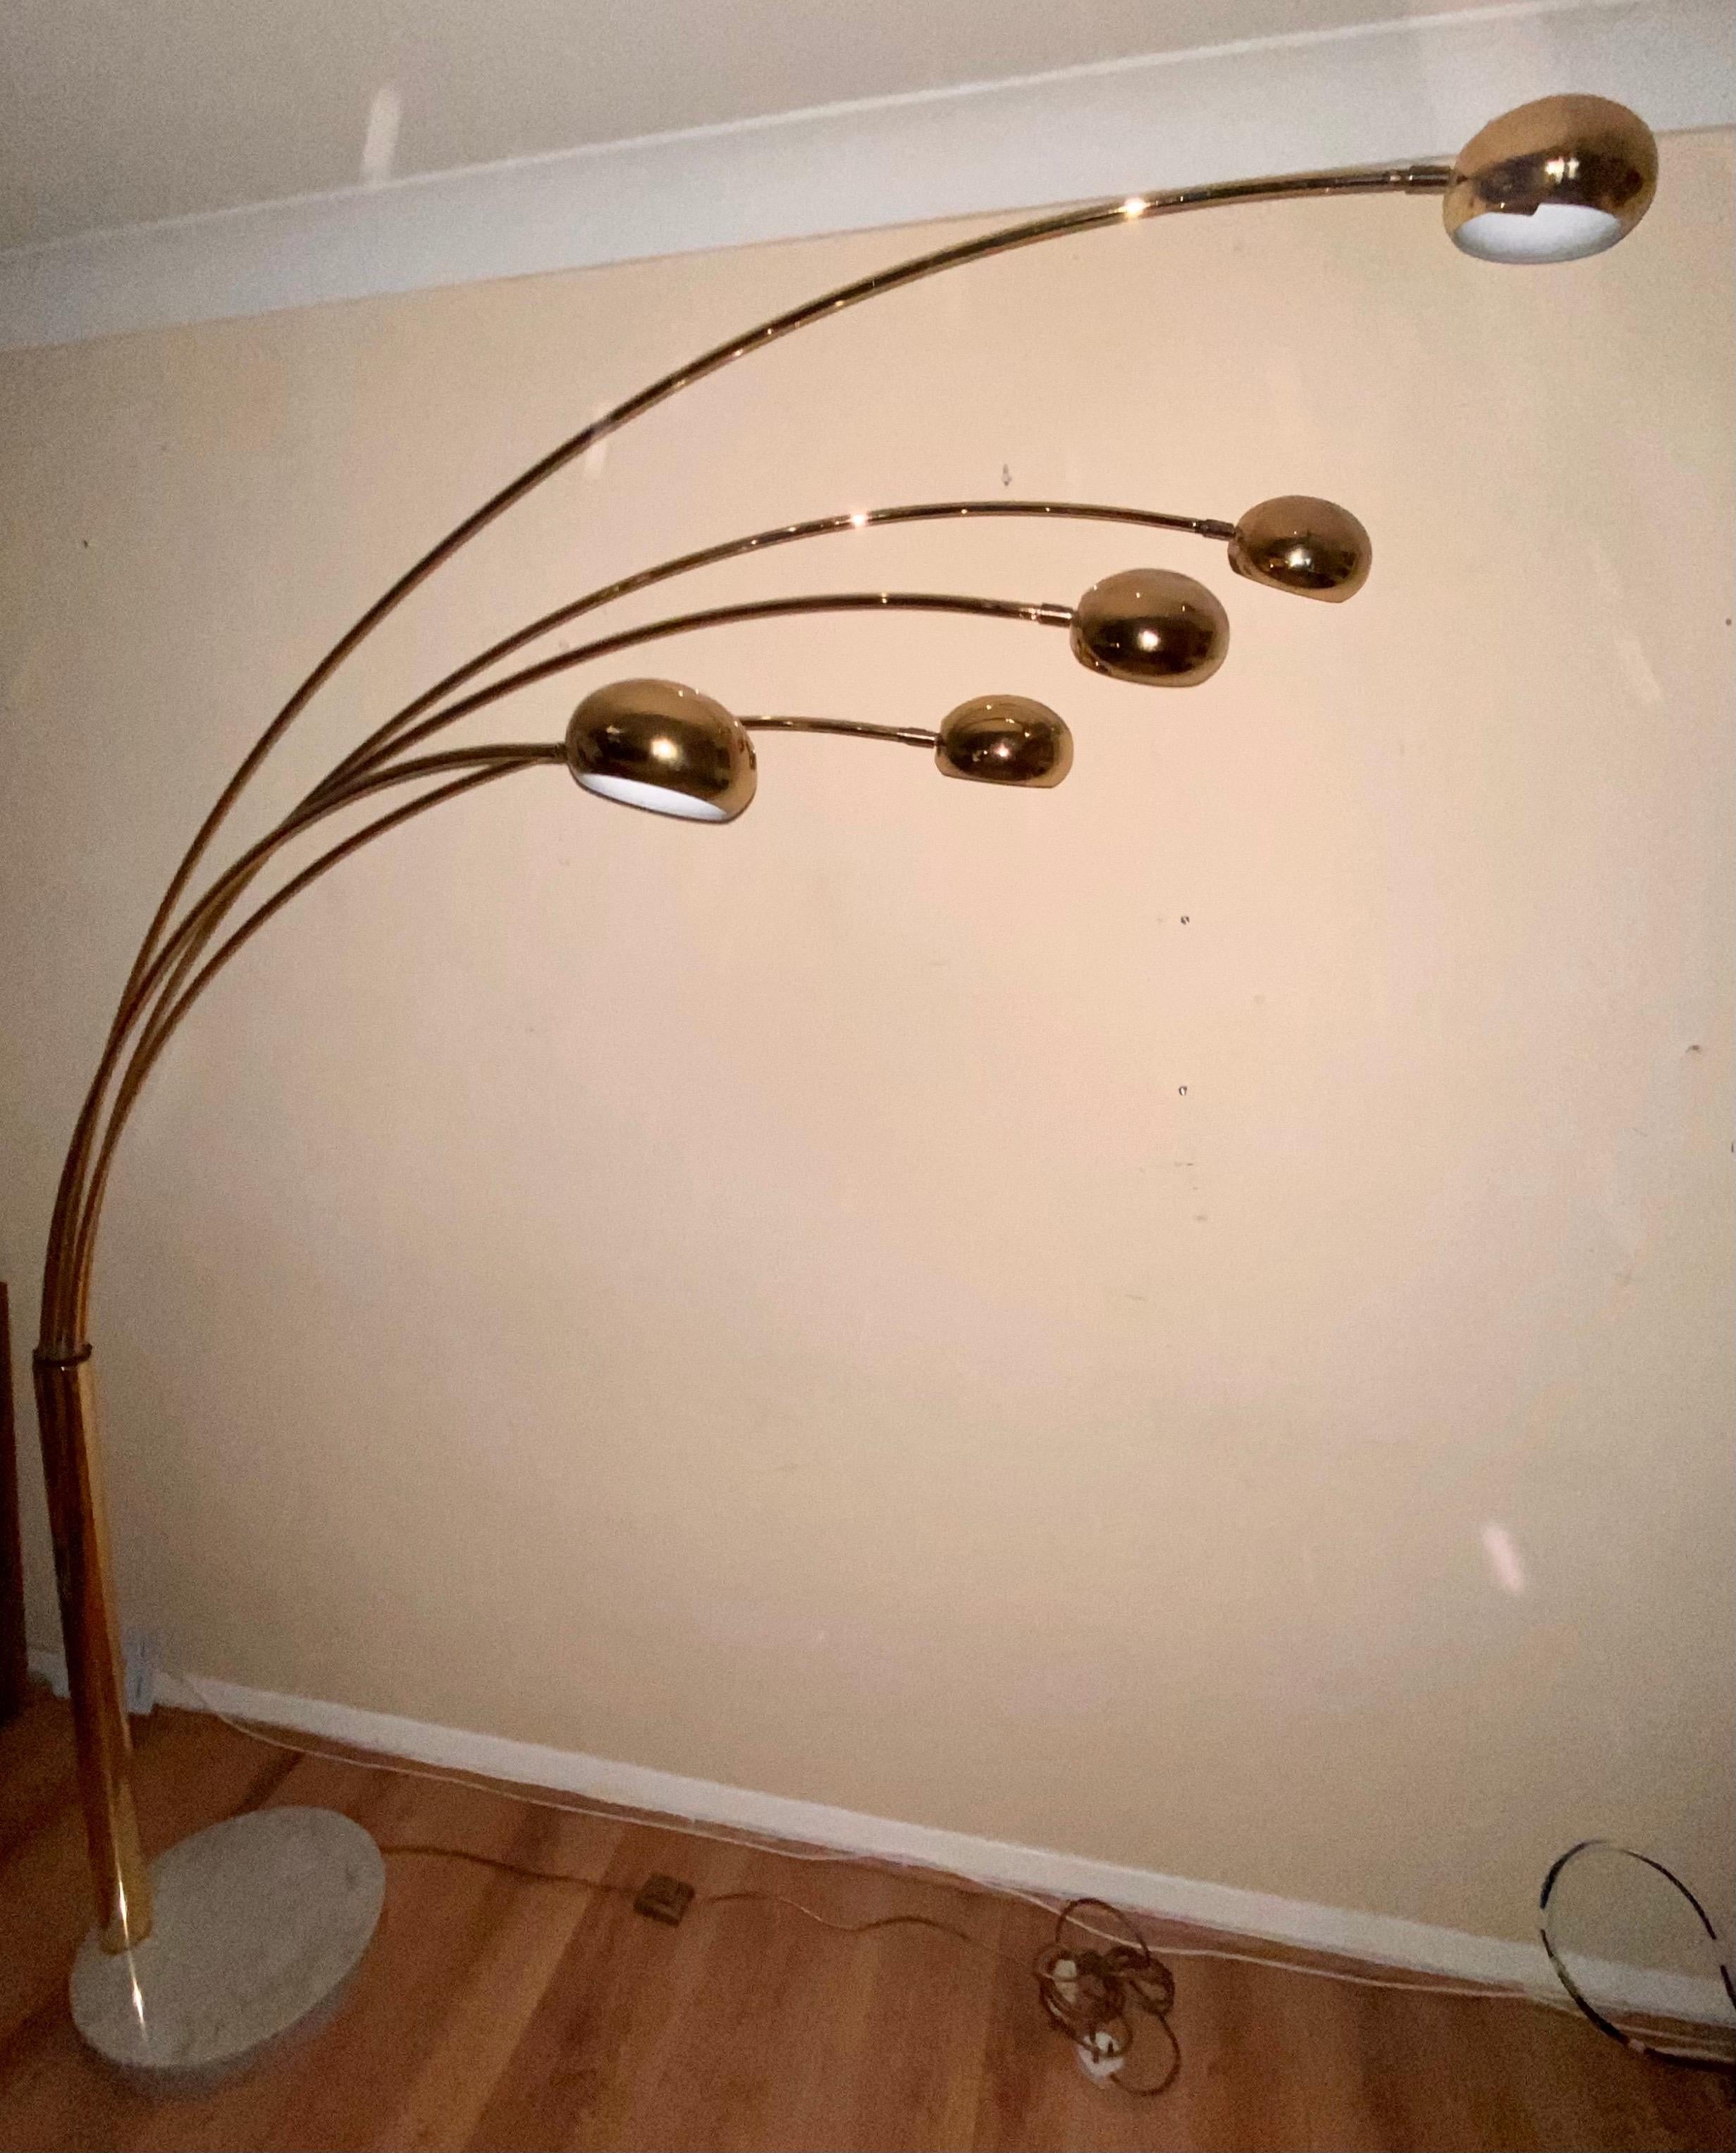 Floor lamp in gold-plated steel with five, articulating, ball shades each attached to an arched tubular arm that swings 360 degrees allowing all five arms to be placed in various positions. The lamp has a heavy round marble base at the bottom